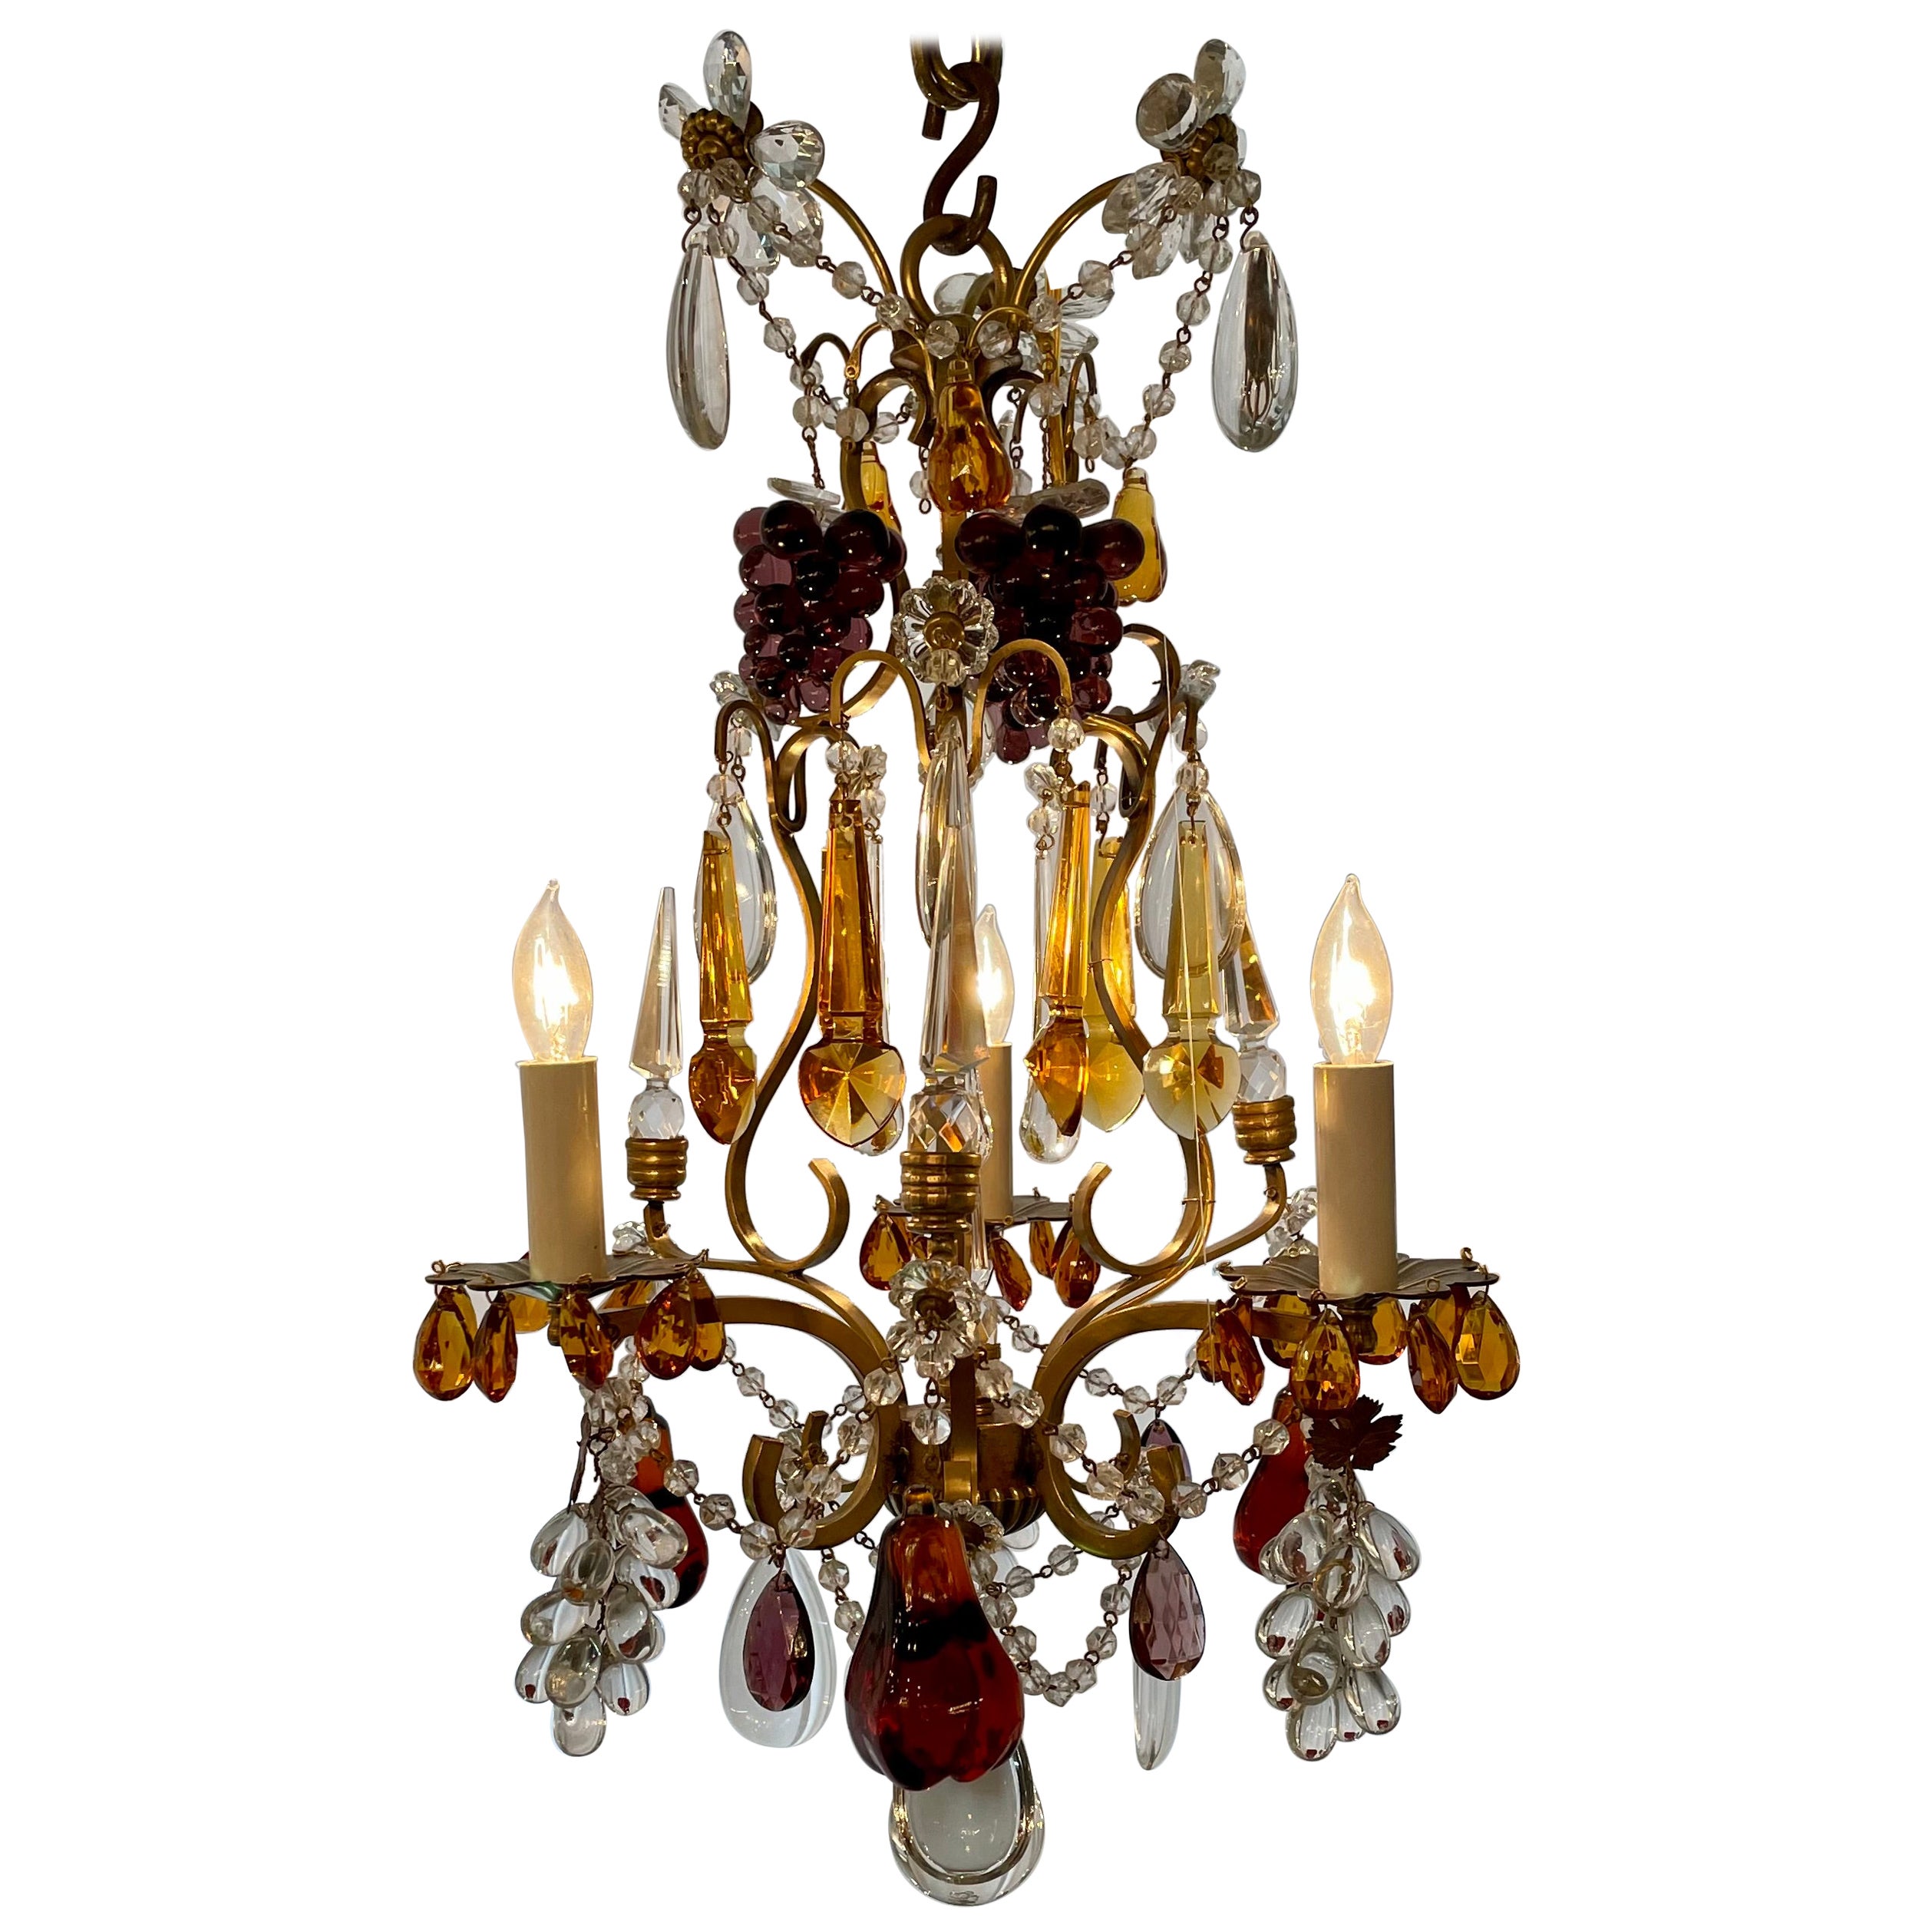 Antique French Multi-Colored Baccarat Crystal & Gold Bronze Chandelier, Ca 1880.